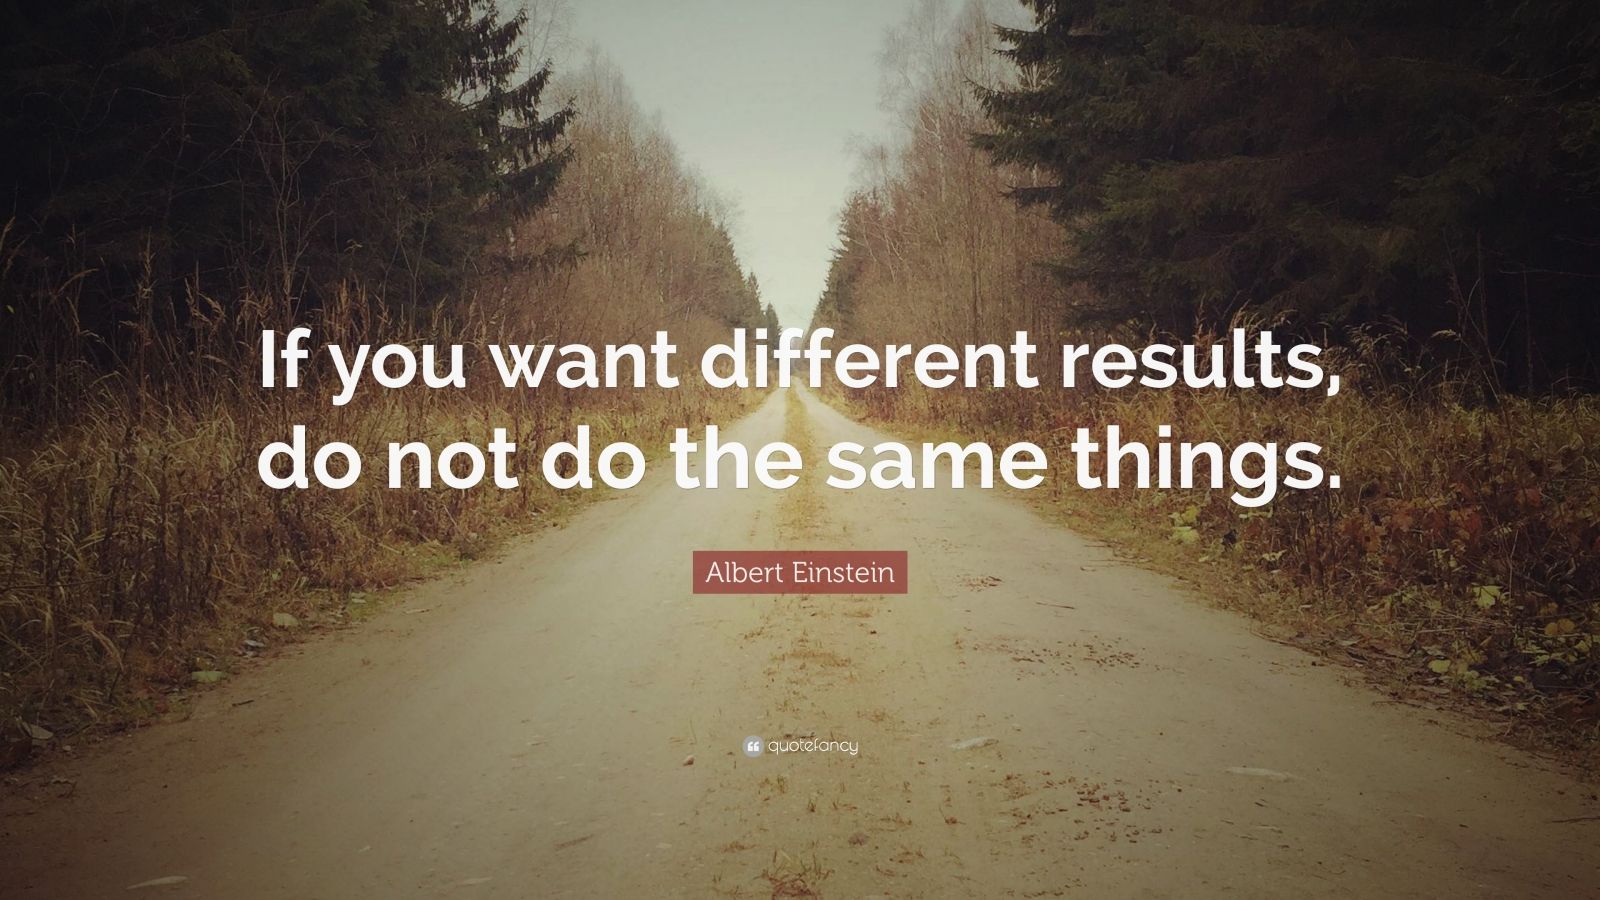 Albert Einstein Quote: “If you want different results, do not do the